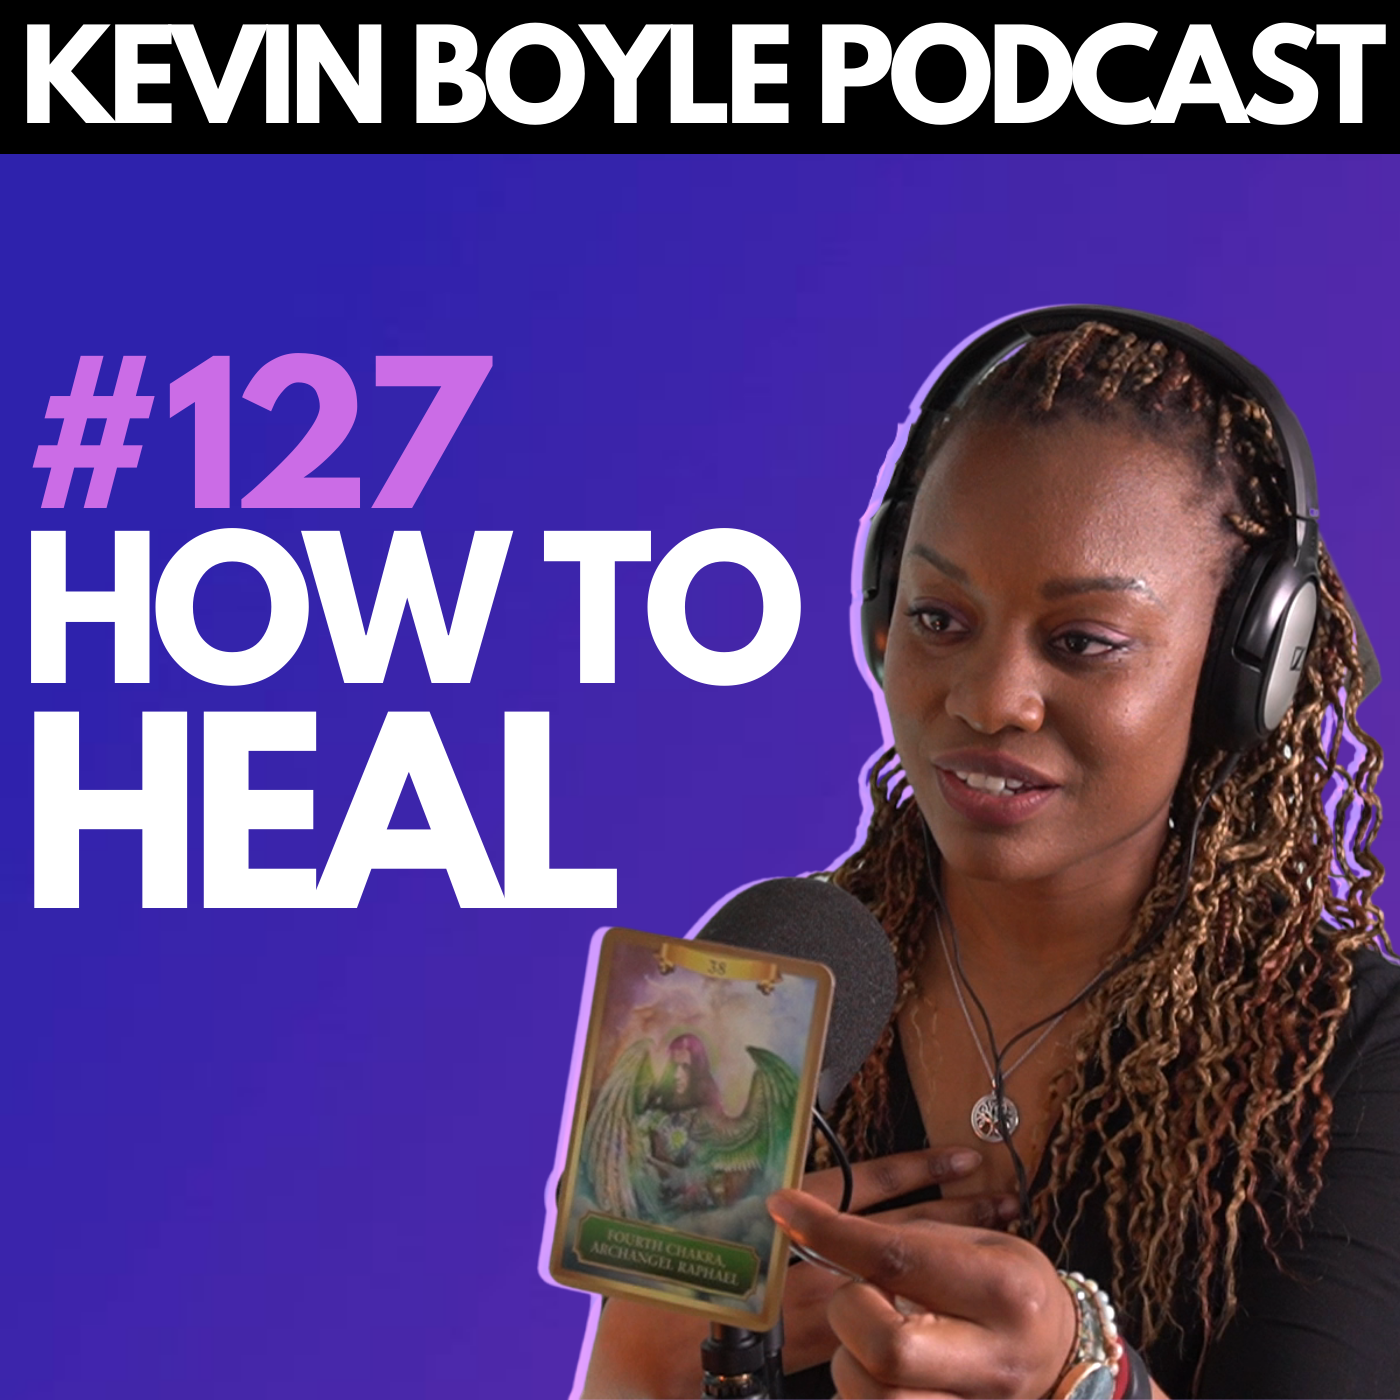 #127: Sheila - How to heal, spirituality vs religion and important questions we need to ask.